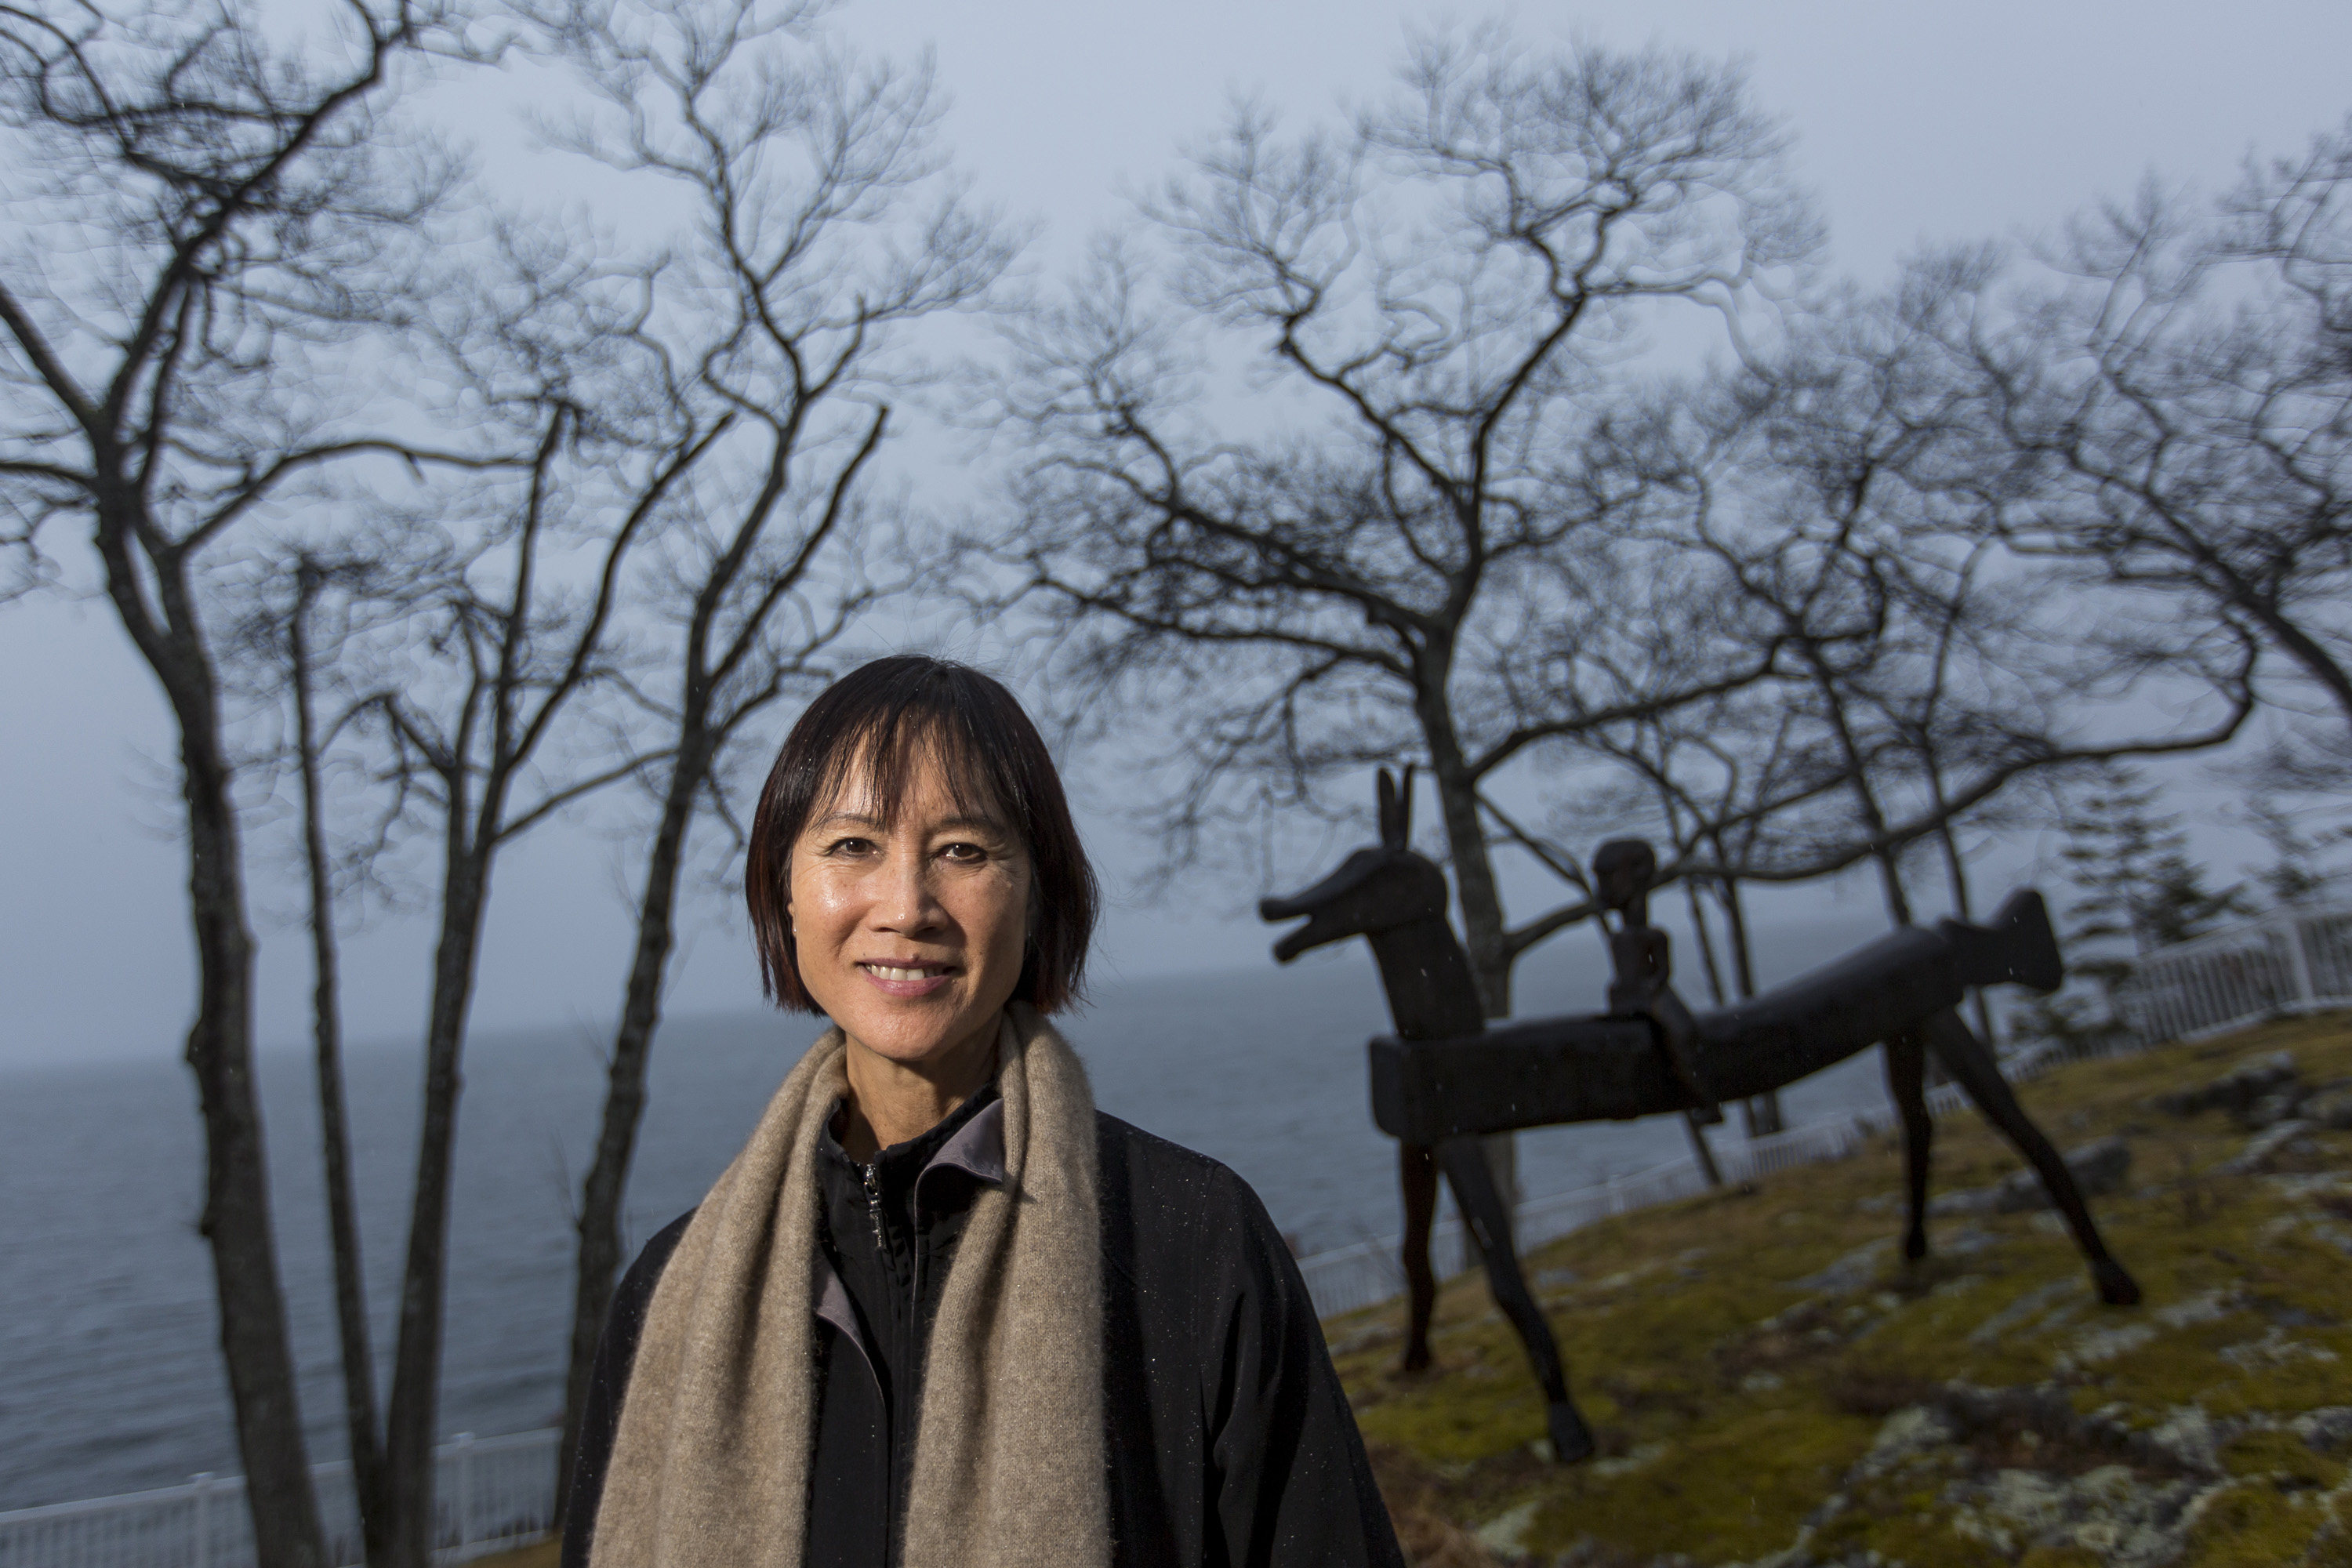 Best-selling author Tess Gerritsen in the backyard of her home in Camden, Massachusetts. Despite her success, as a Chinese-American she still doesn’t feel accepted. Photo: Getty Images